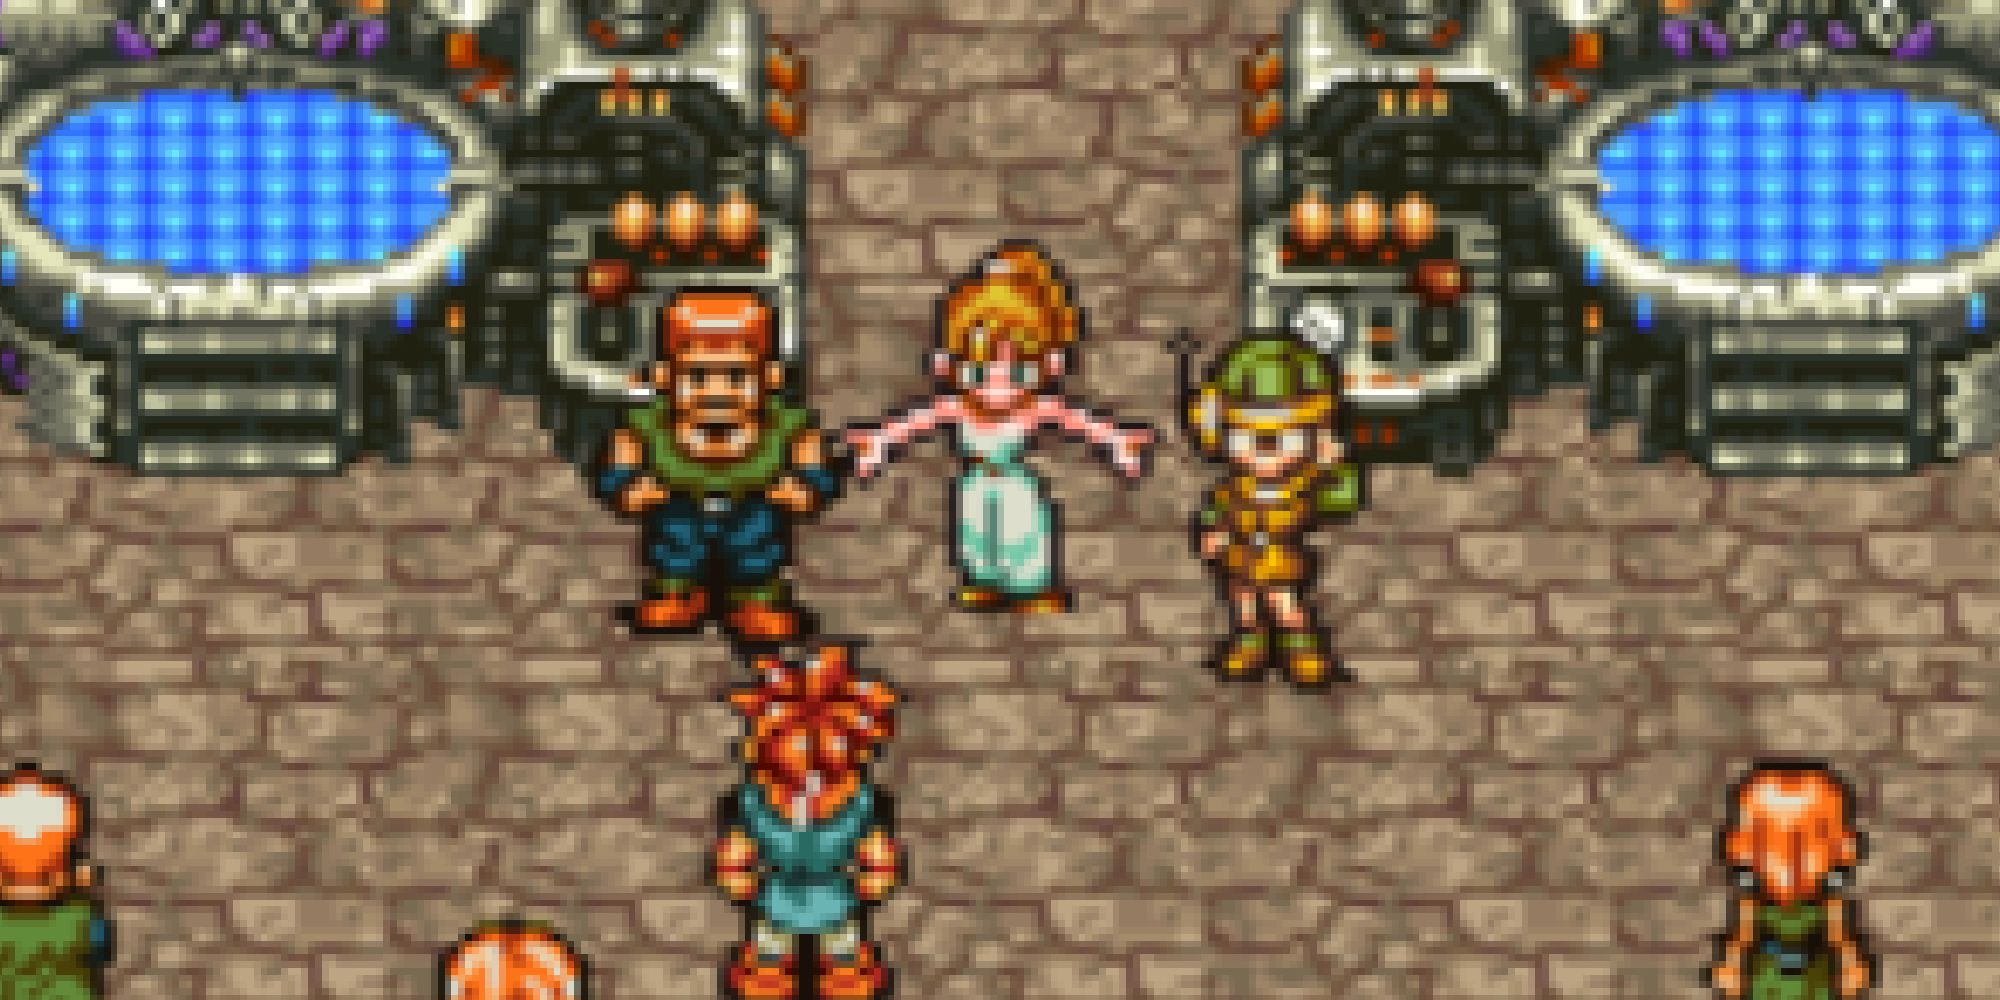 Marle volunteering as a test subject at the Millenium Festival in Chrono Trigger